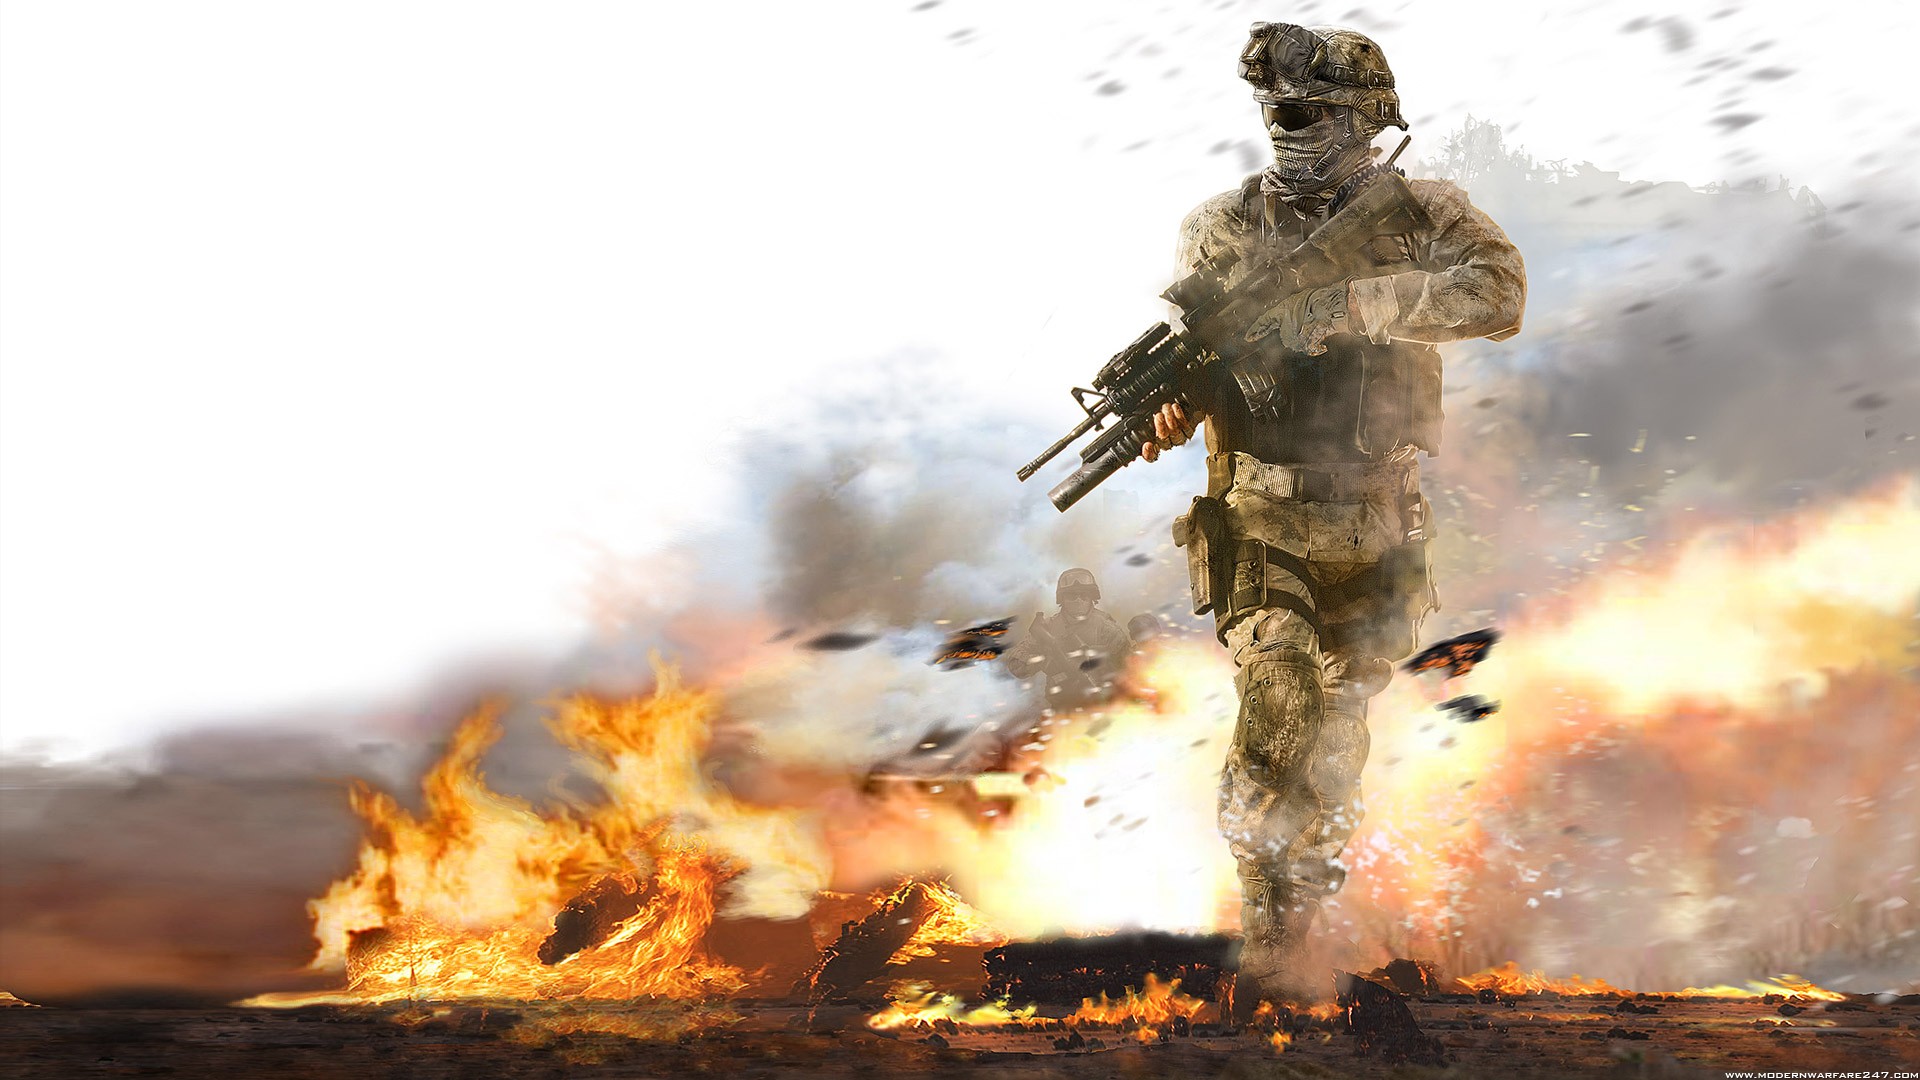 Call Of Duty Modern Warfare 2 Call Of Duty Video Games Soldier Fire Combat Weapon 1920x1080